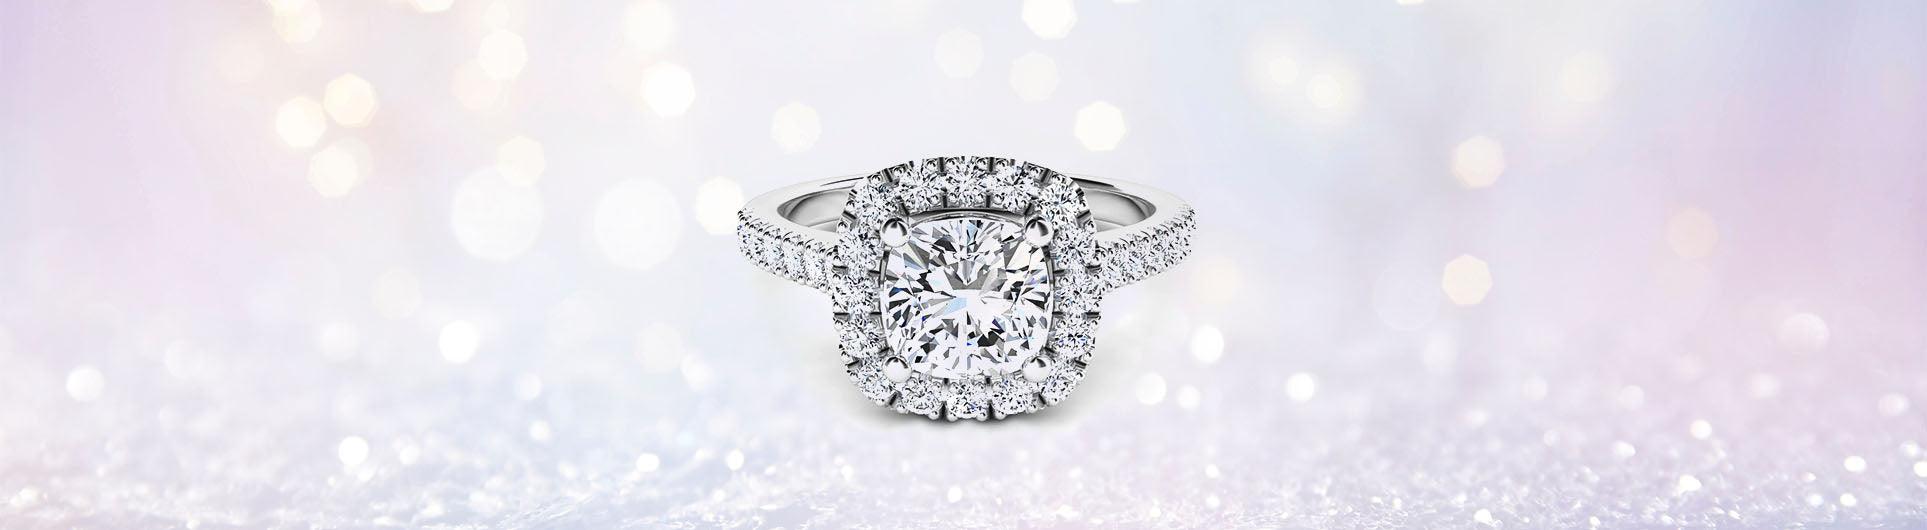 How to Choose the Perfect Engagement Ring from Monroe Yorke Diamonds 